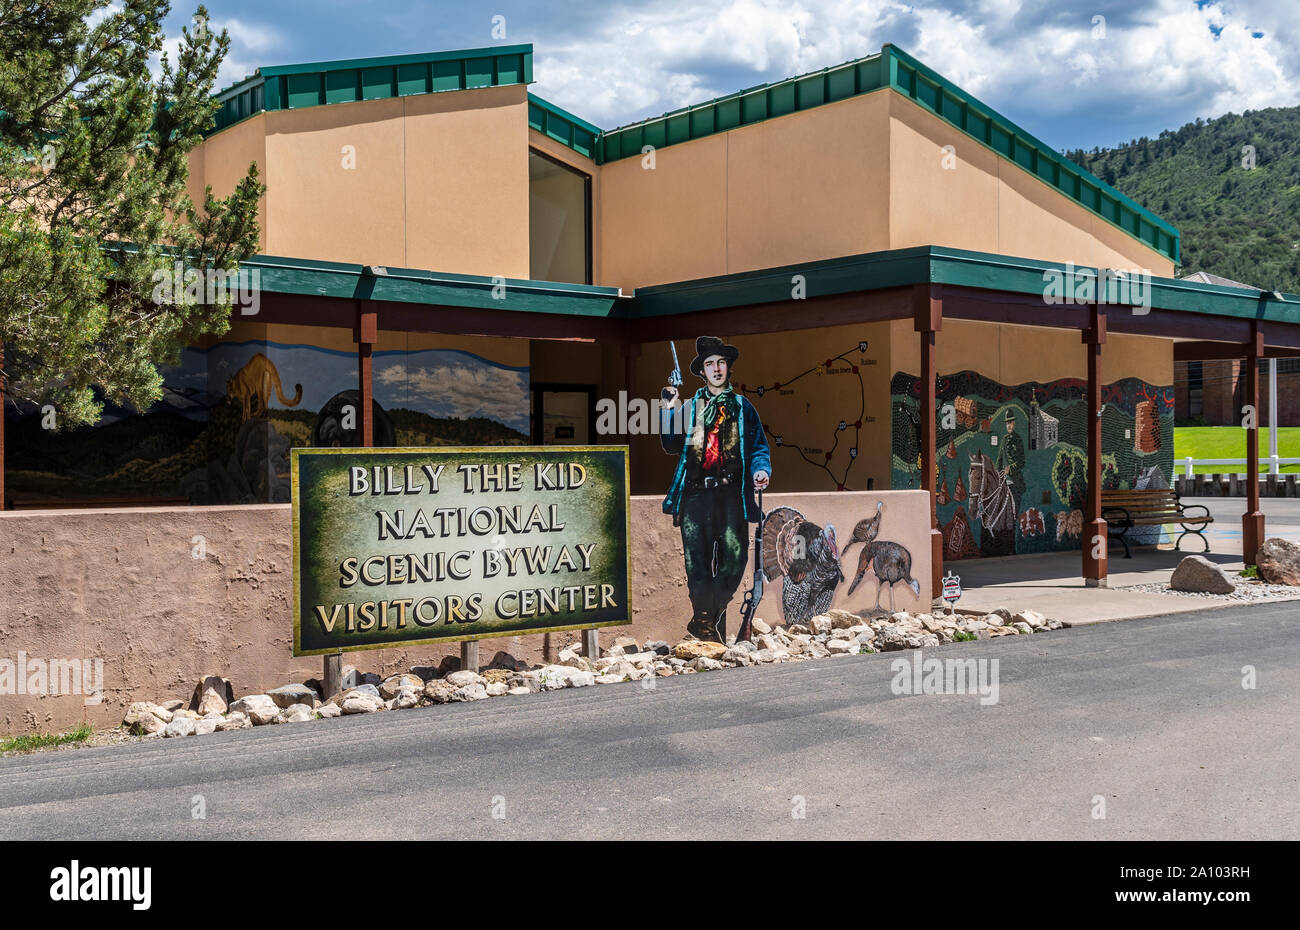 Billy the Kid National Scenic Byway Visitors Center in Ruidoso Downs, Lincoln County New Mexico, USA Stock Photo